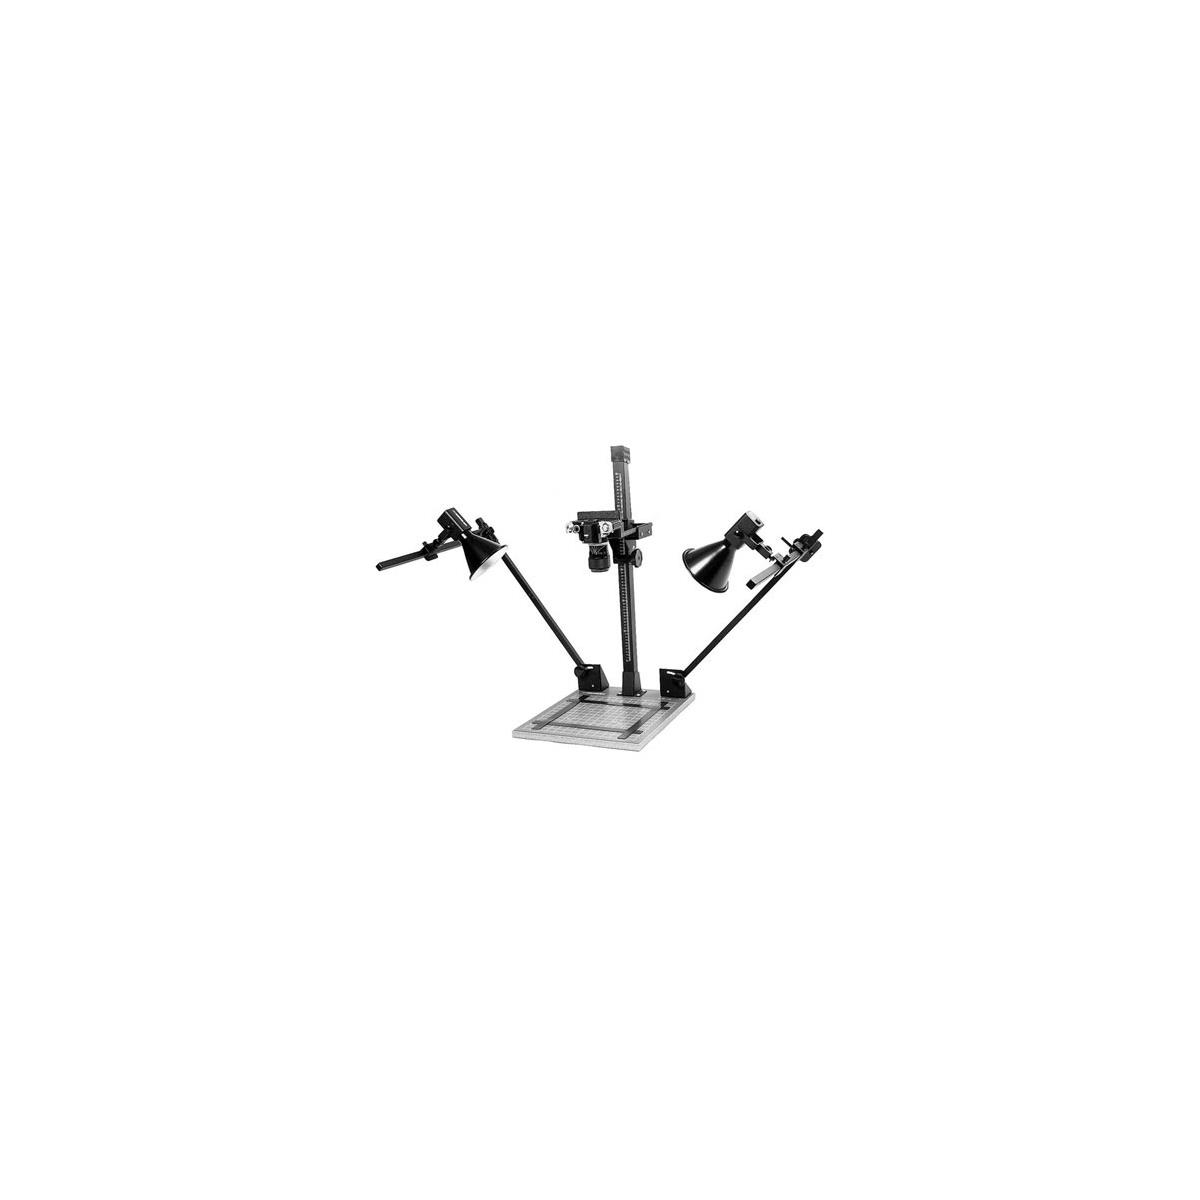 Image of Beseler CSK-14 Copy Stand Kit with Lights